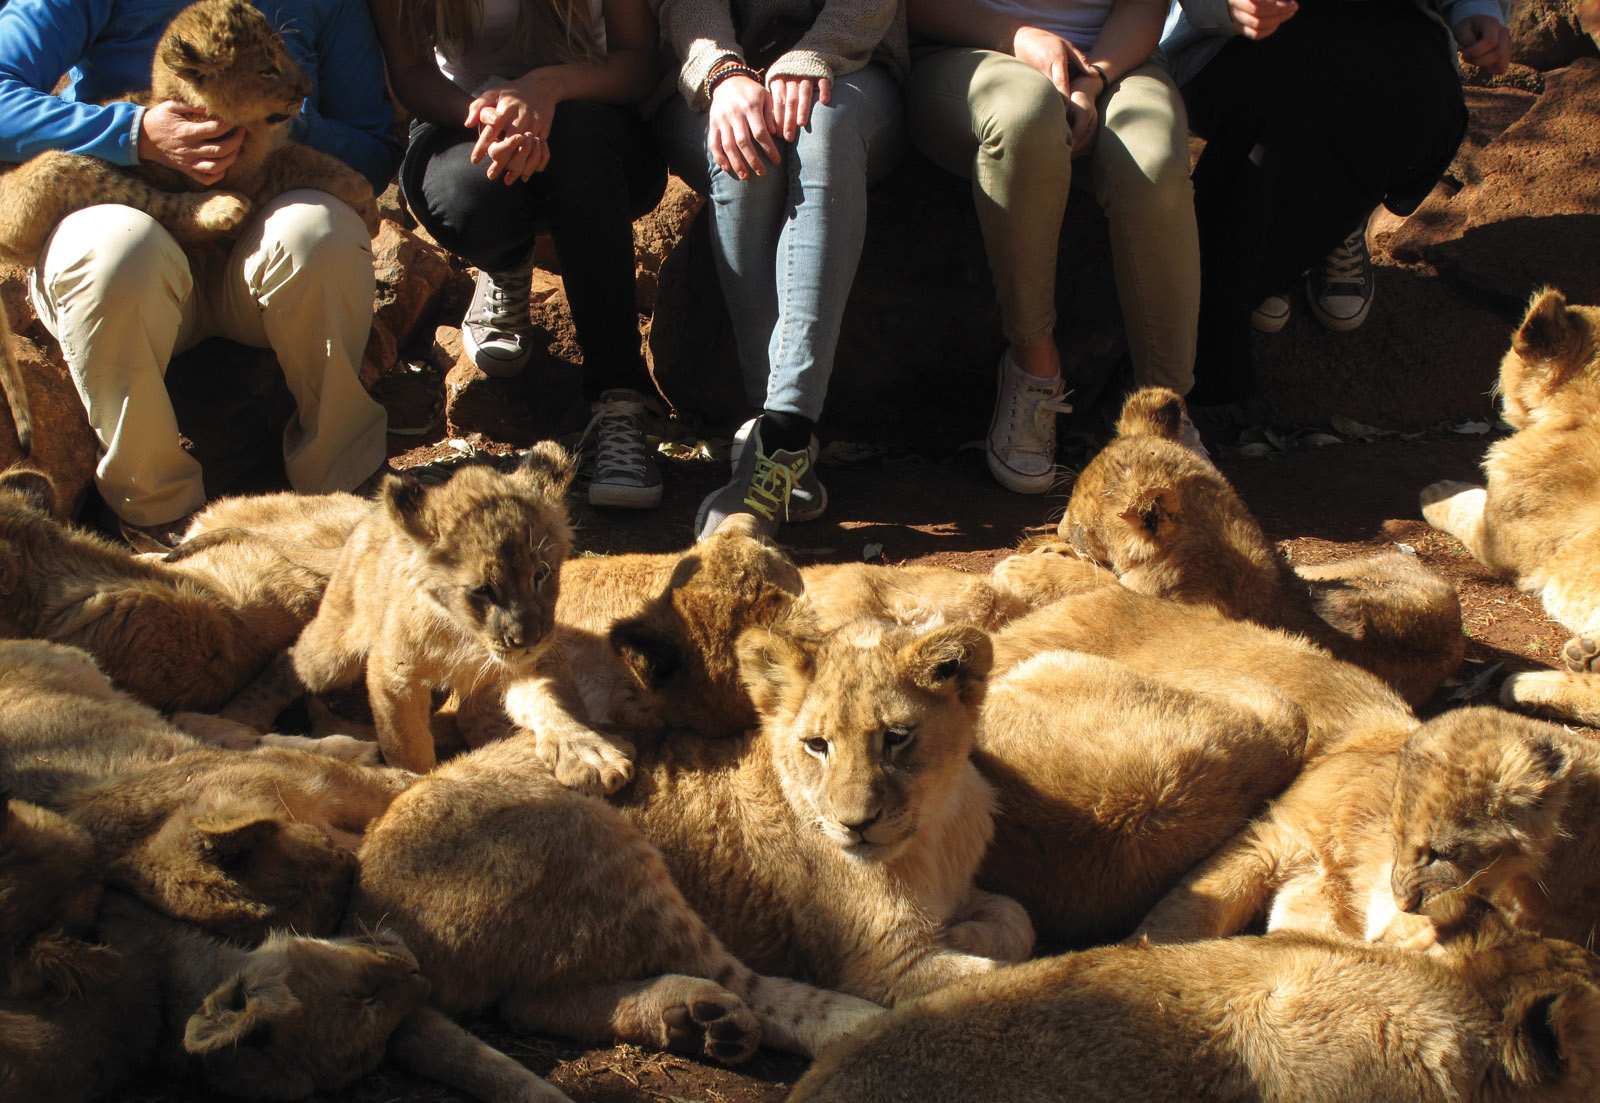 CANNED HUNTING: WHAT ARE THE ALTERNATIVES?